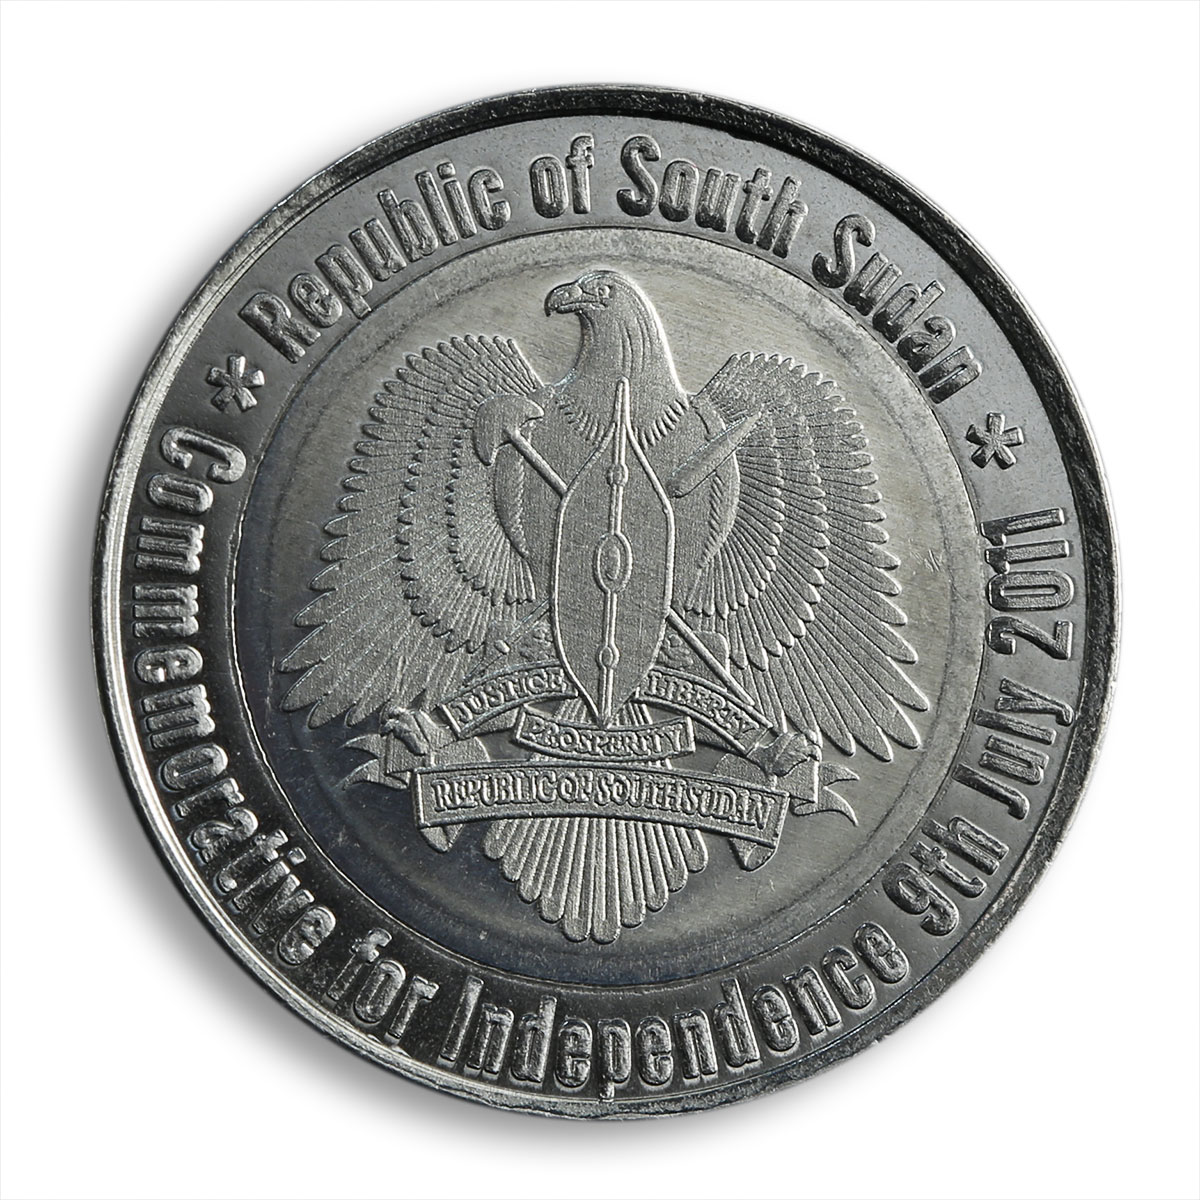 Southern Sudan, a set of 2 coins, 20 pounds, First President, 2011